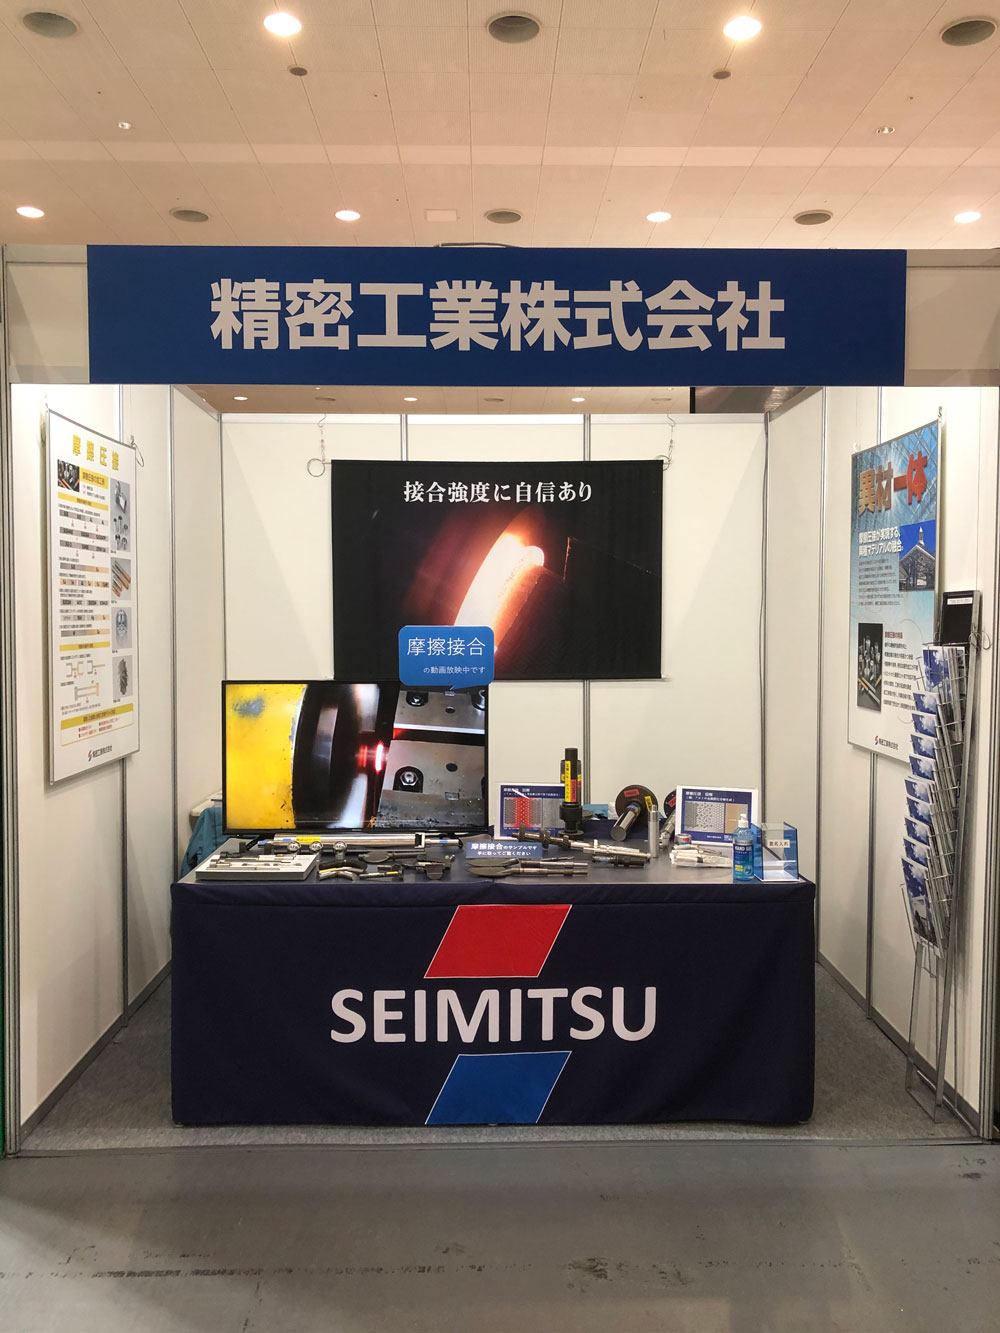  23rd Mechanical Components & Materials Technology Expo OSAKA